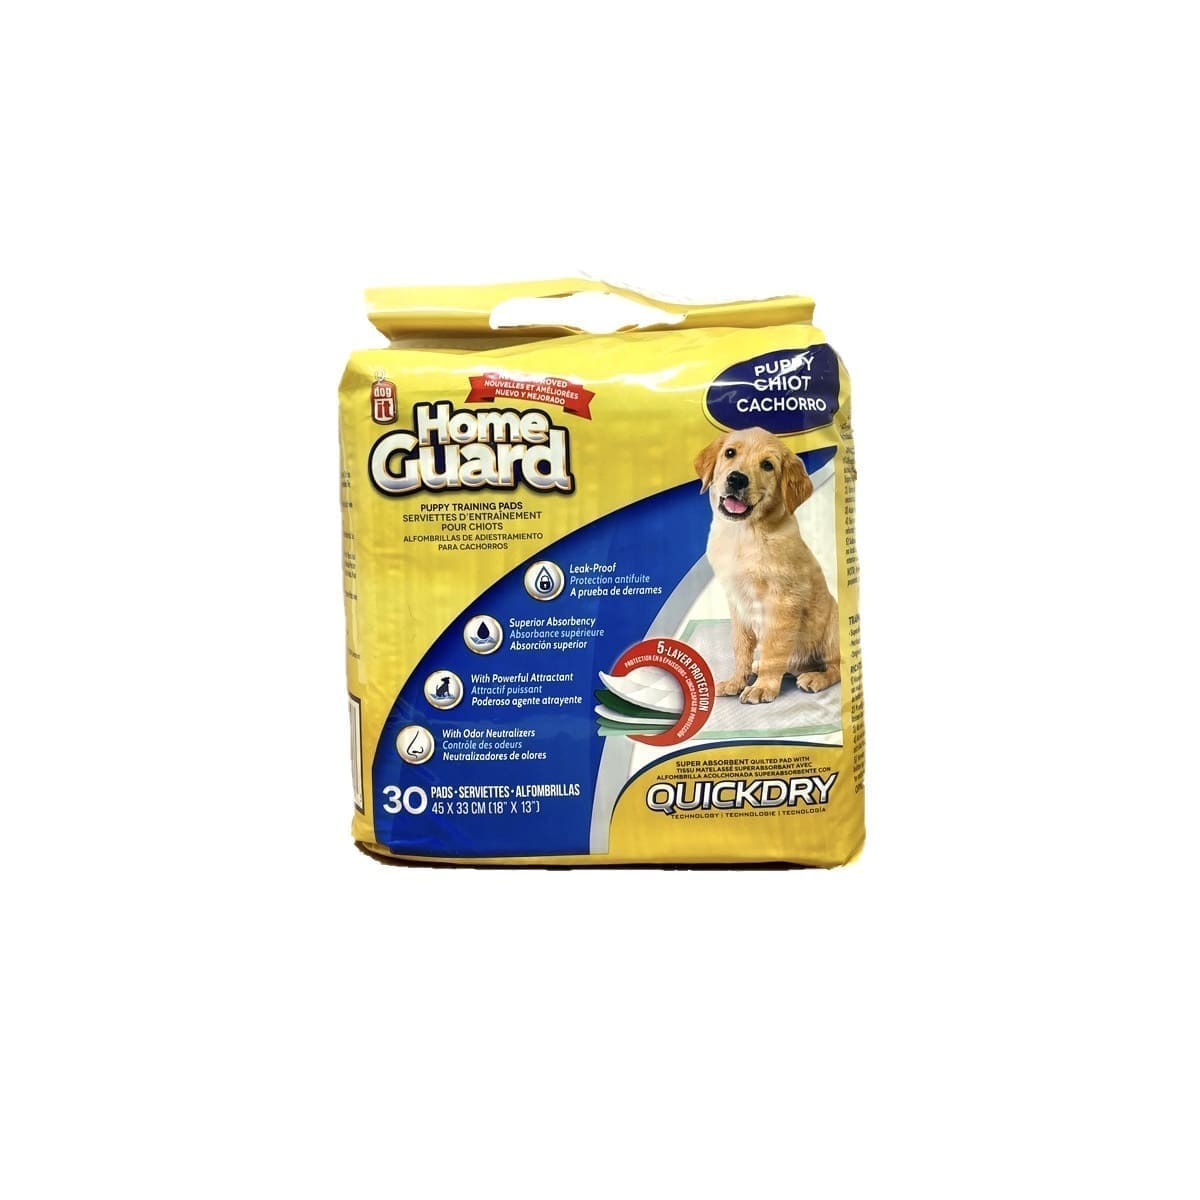 Home Guard Puppy Training Pads (30 count)